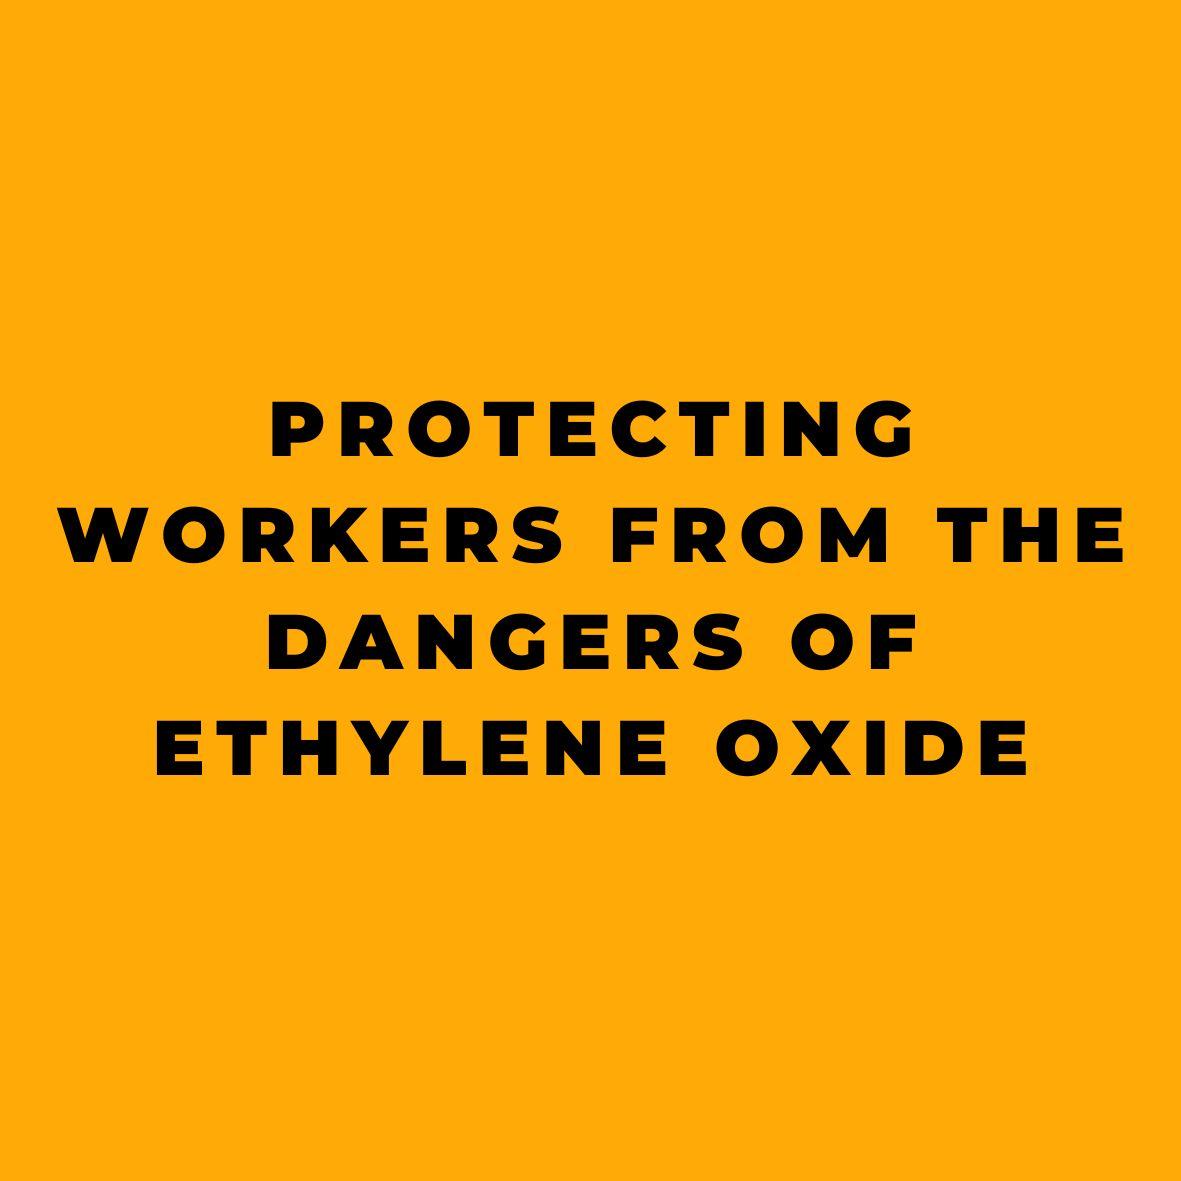 Protecting Workers from the Dangers of Ethylene Oxide